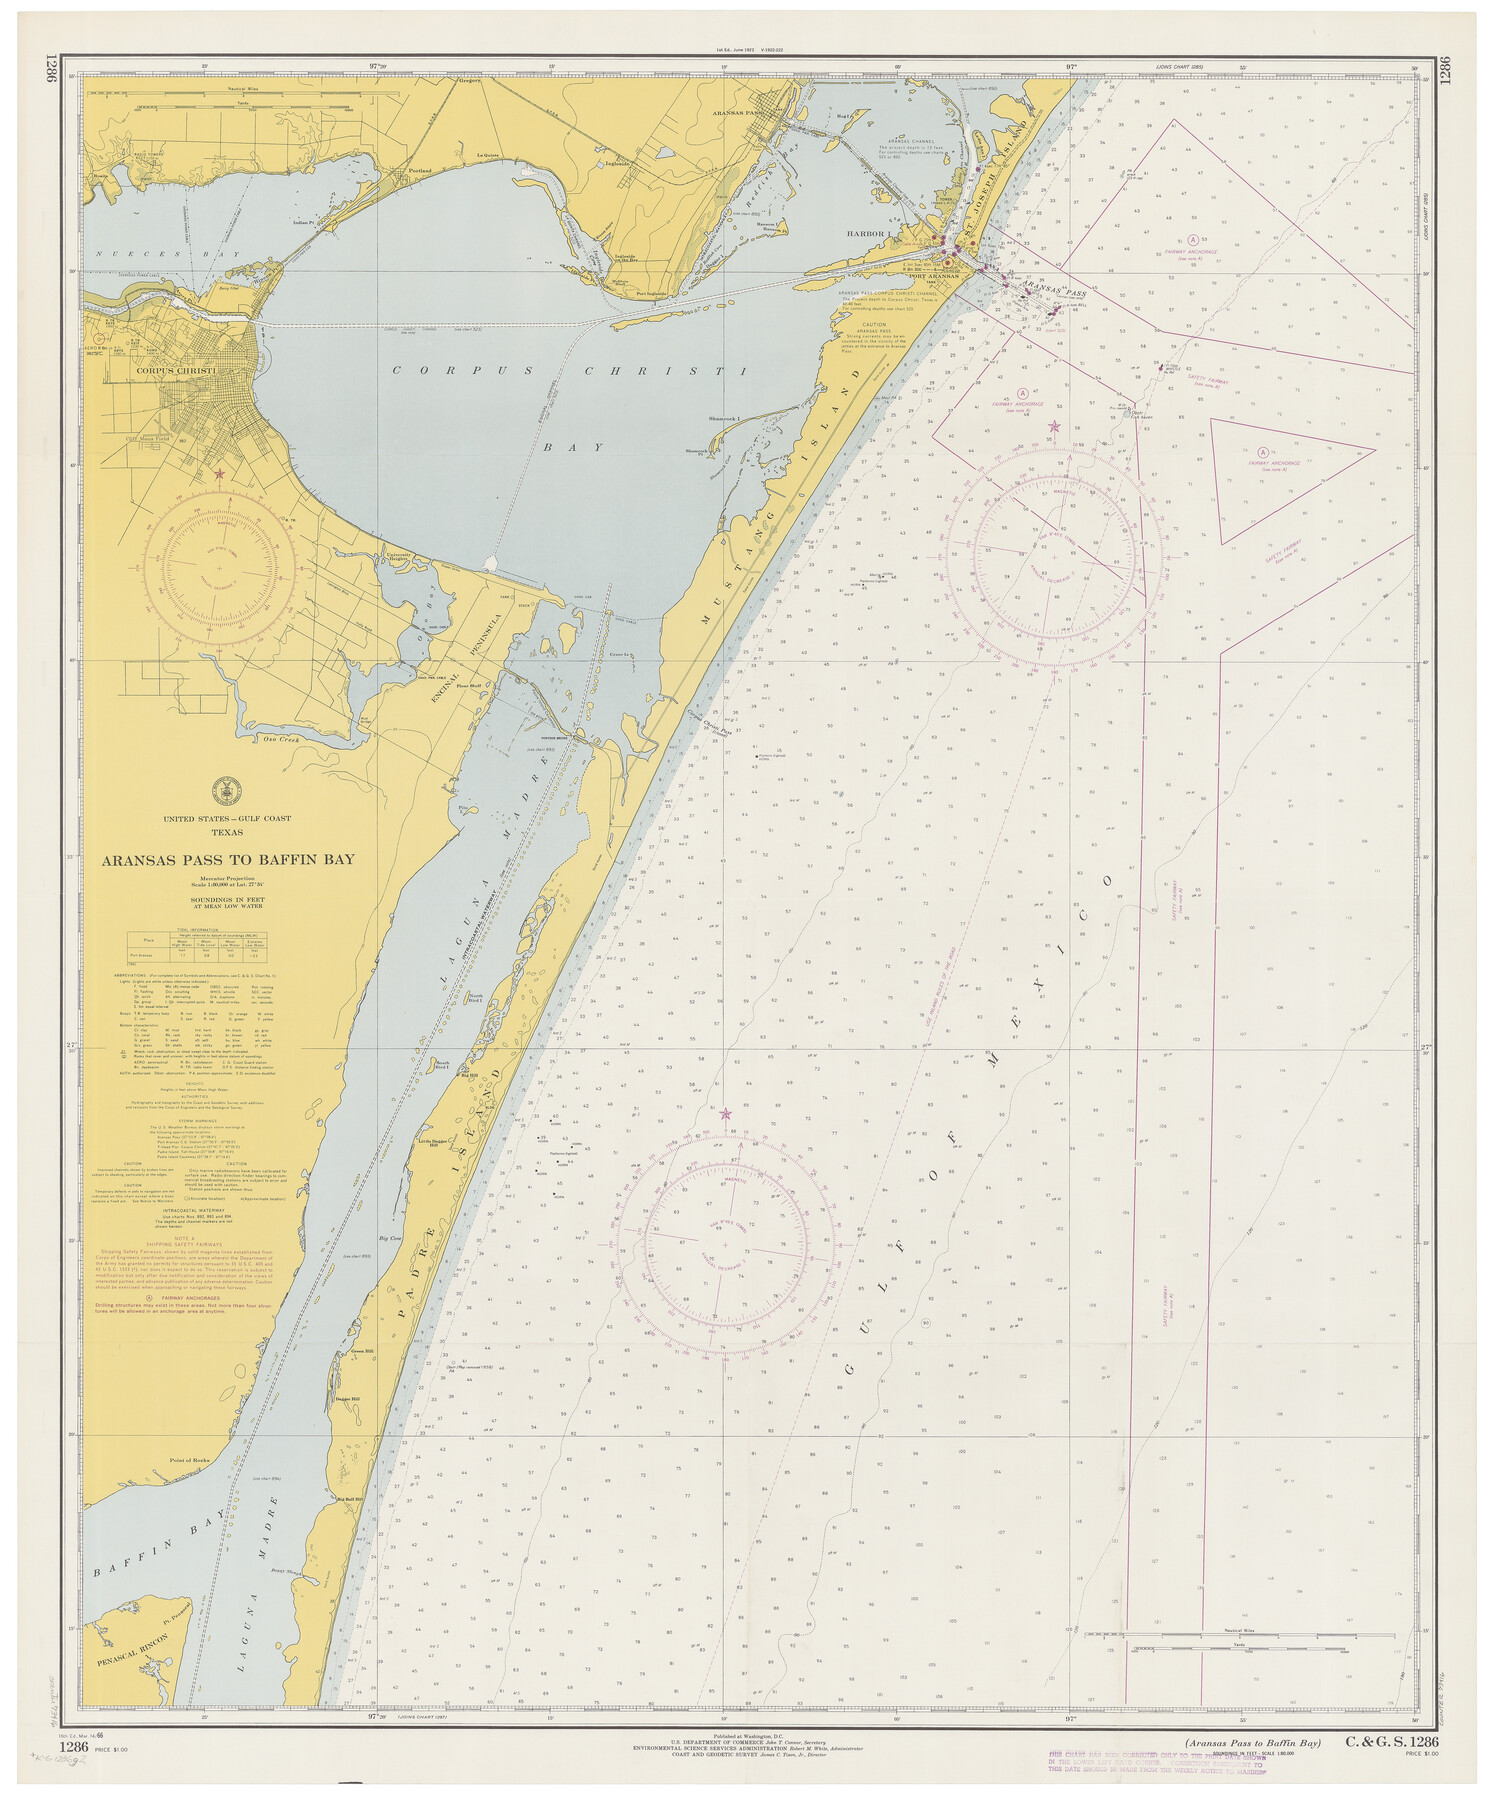 73416, Aransas Pass to Baffin Bay, General Map Collection